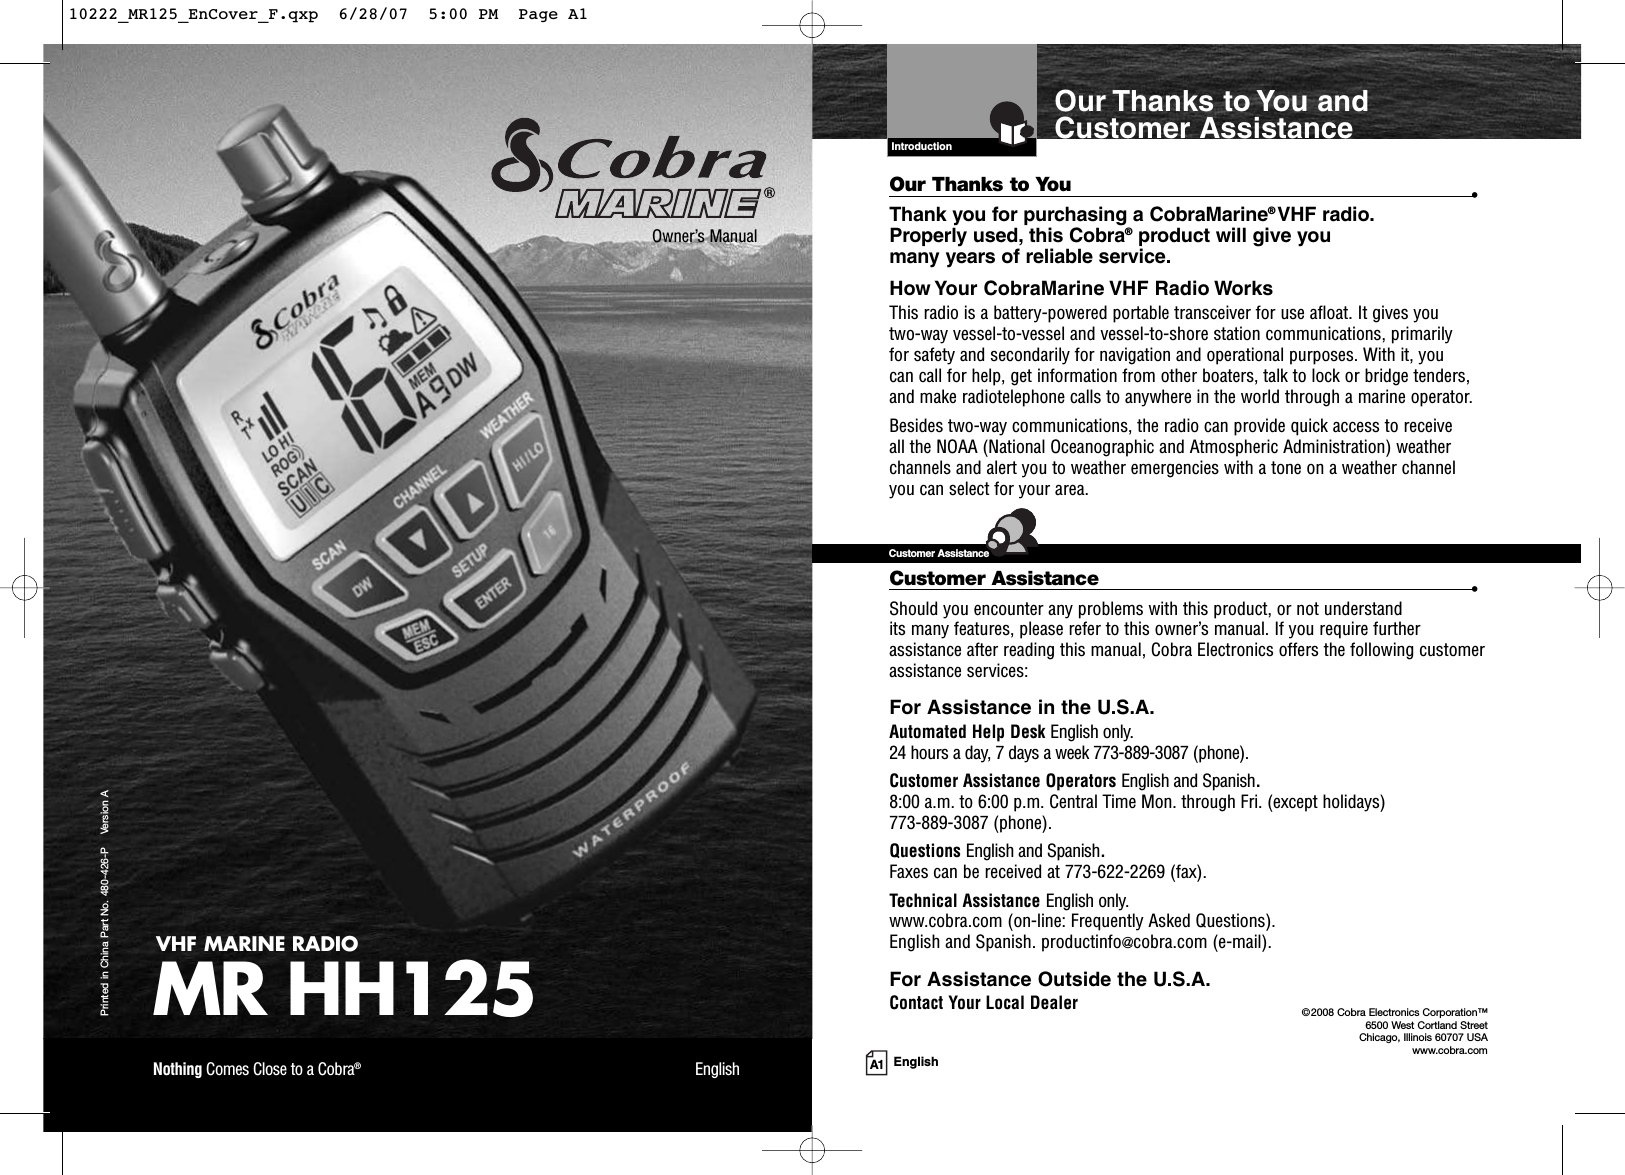 A1 EnglishOur Thanks to You andCustomer AssistanceIntroductionVHF MARINE RADIOMR HH125Printed in China Part No. 480-426-P    Version AOwner’s ManualNothing Comes Close to a Cobra®EnglishOur Thanks to You •Thank you for purchasing a CobraMarine®VHF radio.Properly used, this Cobra®product will give you many years of reliable service.How Your CobraMarine VHF Radio WorksThis radio is a battery-powered portable transceiver for use afloat. It gives you two-way vessel-to-vessel and vessel-to-shore station communications, primarily for safety and secondarily for navigation and operational purposes. With it, you can call for help, get information from other boaters, talk to lock or bridge tenders, and make radiotelephone calls to anywhere in the world through a marine operator.Besides two-way communications, the radio can provide quick access to receive all the NOAA (National Oceanographic and Atmospheric Administration) weatherchannels and alert you to weather emergencies with a tone on a weather channelyou can select for your area.Customer Assistance •Should you encounter any problems with this product, or not understand its many features, please refer to this owner’s manual. If you require furtherassistance after reading this manual, Cobra Electronics offers the following customerassistance services:For Assistance in the U.S.A.Automated Help Desk English only.24 hours a day, 7 days a week 773-889-3087 (phone).Customer Assistance Operators English and Spanish.8:00 a.m. to 6:00 p.m. Central Time Mon. through Fri. (except holidays) 773-889-3087 (phone).Questions English and Spanish.Faxes can be received at 773-622-2269 (fax).Technical Assistance English only.www.cobra.com (on-line: Frequently Asked Questions).English and Spanish. productinfo@cobra.com (e-mail).For Assistance Outside the U.S.A.Contact Your Local DealerCustomer Assistance©2008 Cobra Electronics Corporation™ 6500 West Cortland StreetChicago, Illinois 60707 USAwww.cobra.com10222_MR125_EnCover_F.qxp  6/28/07  5:00 PM  Page A1